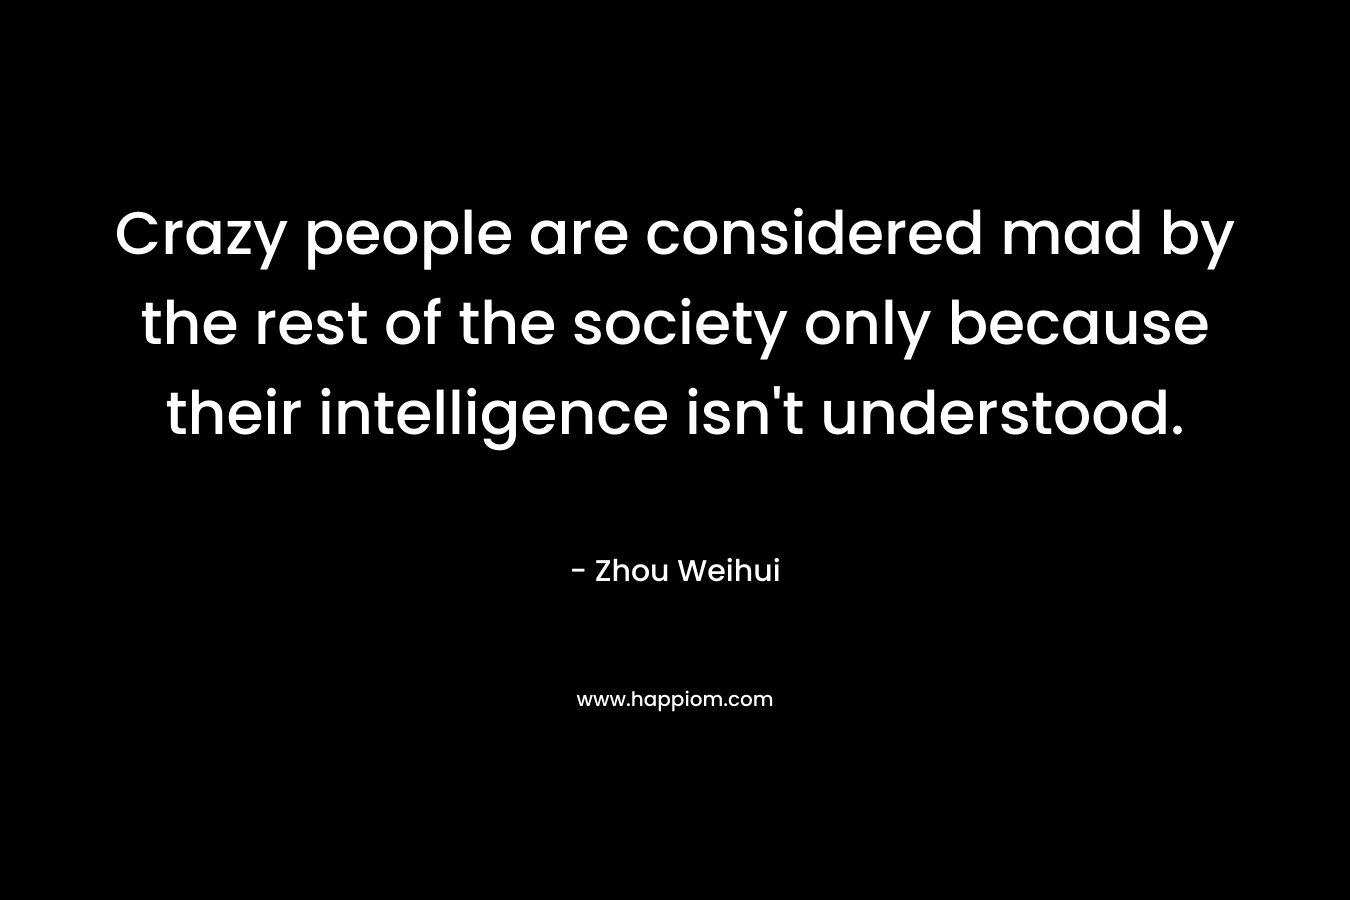 Crazy people are considered mad by the rest of the society only because their intelligence isn’t understood. – Zhou Weihui